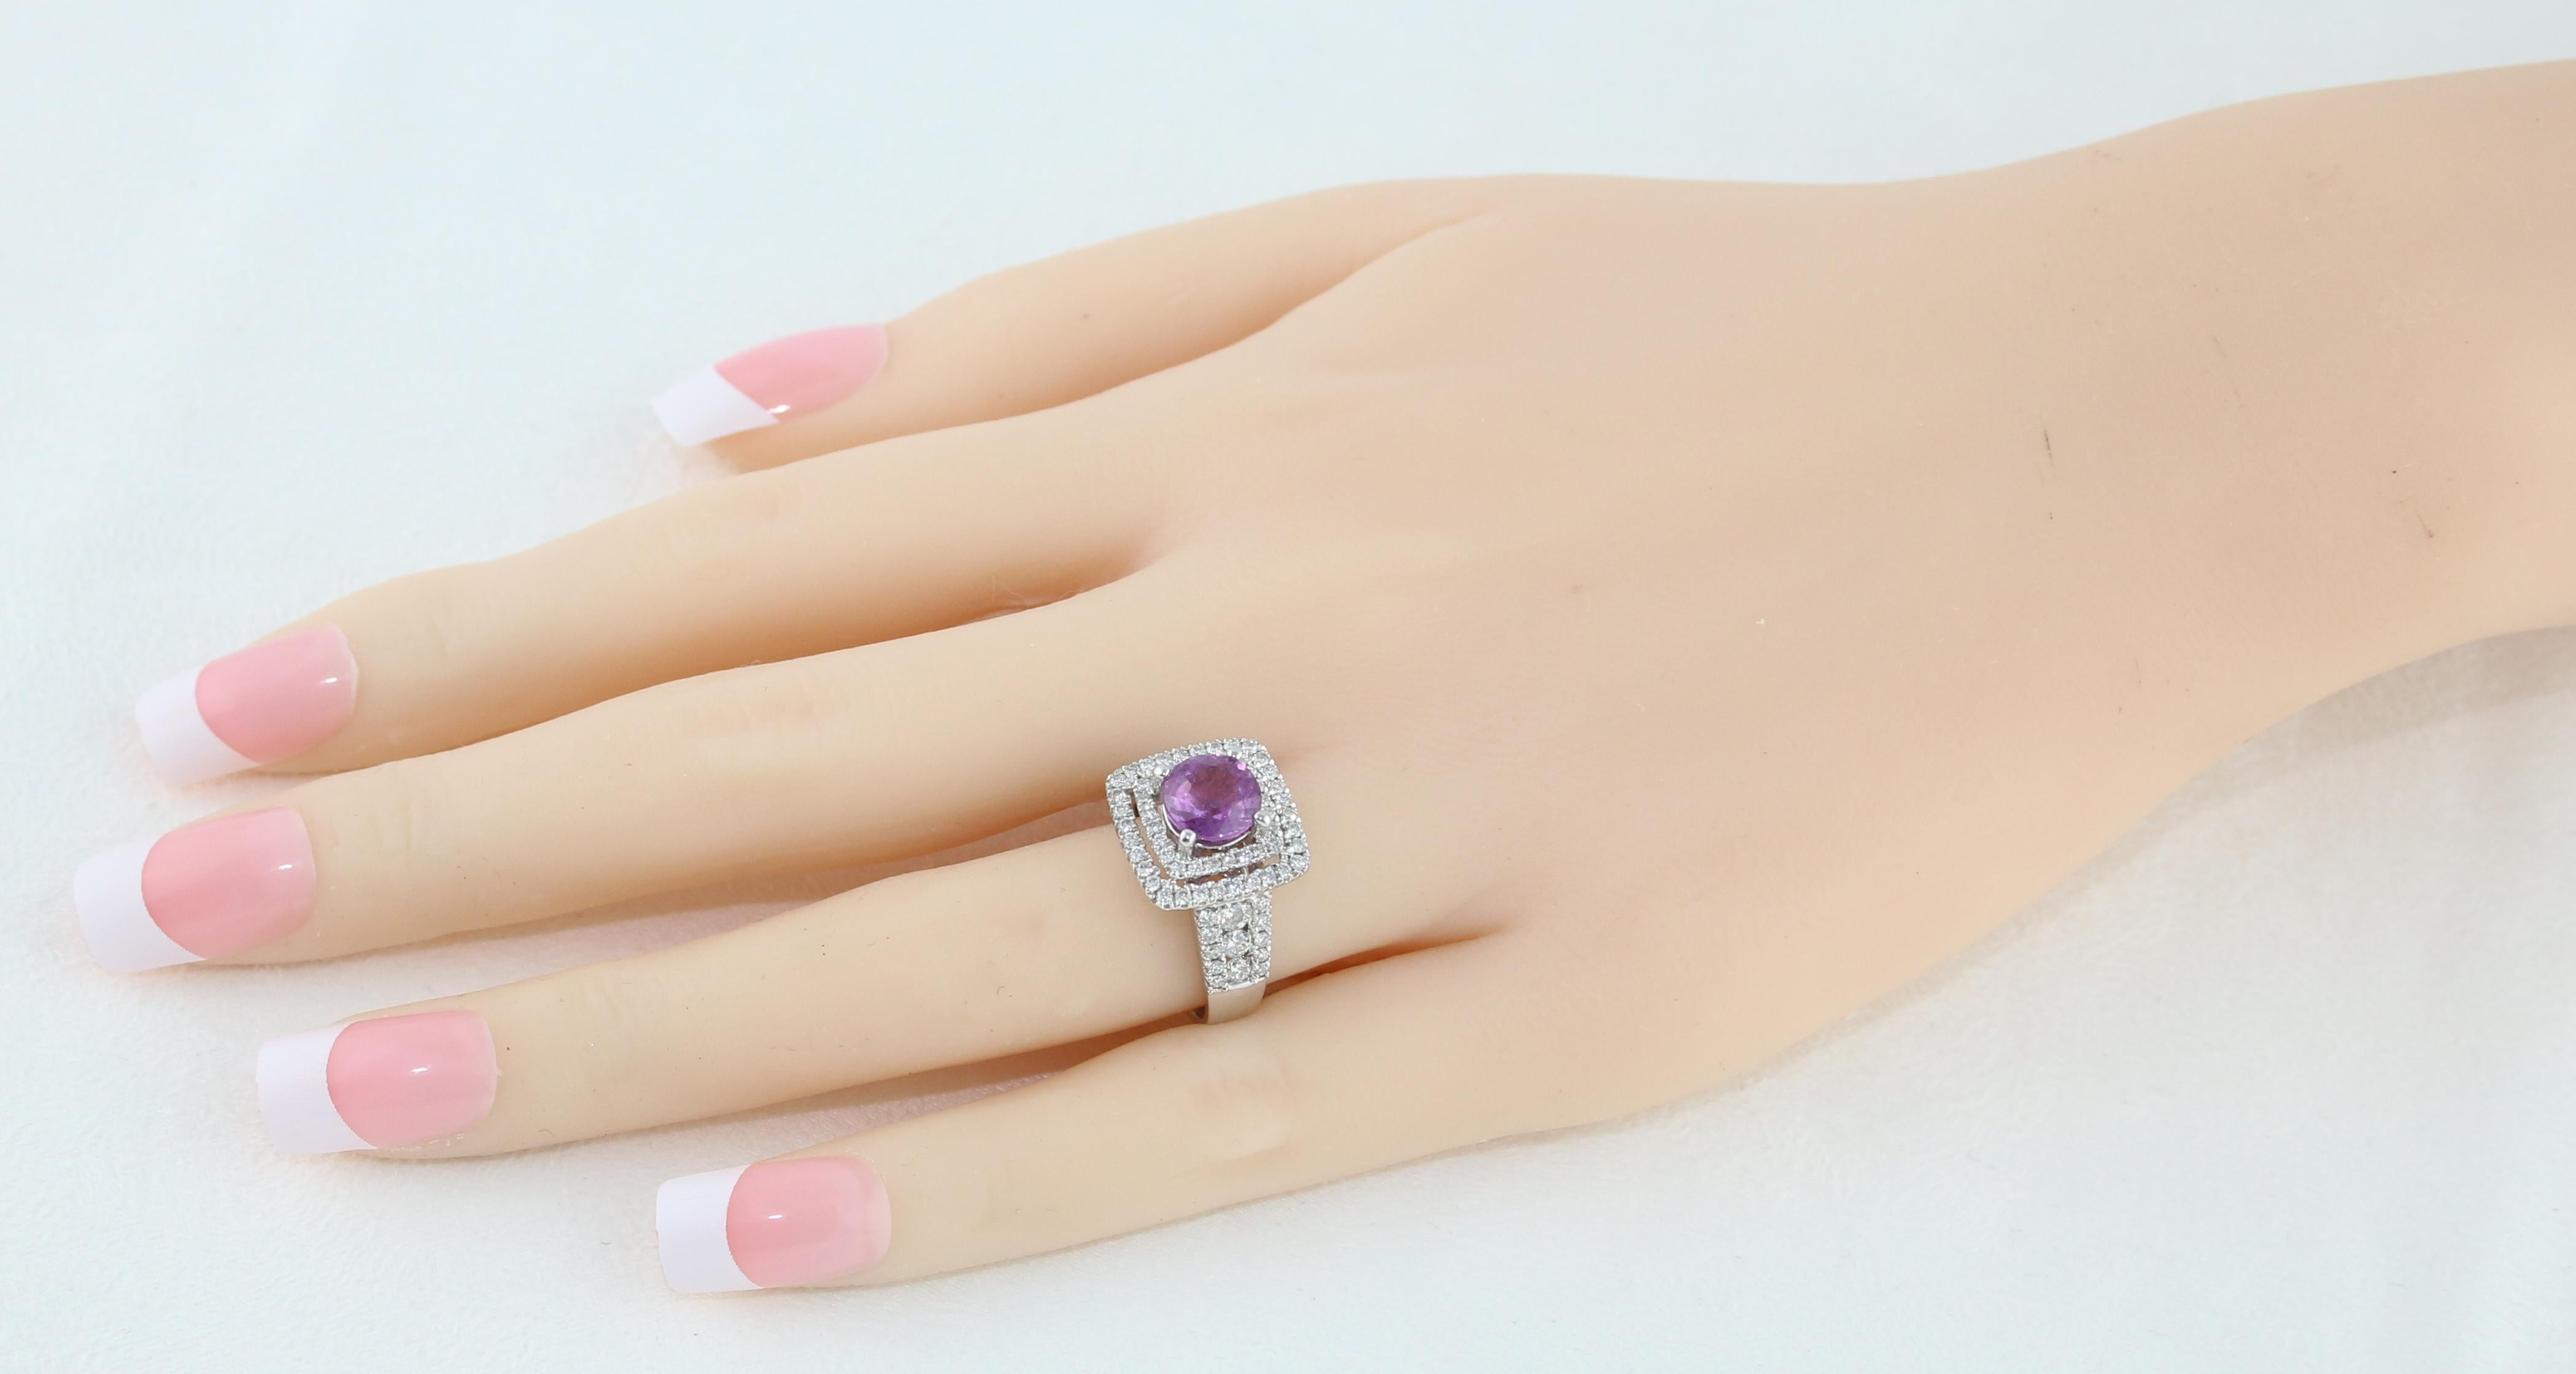 Round Cut Certified No Heat 1.97 Carat Pinkish Violet Sapphire Diamond Gold Ring For Sale